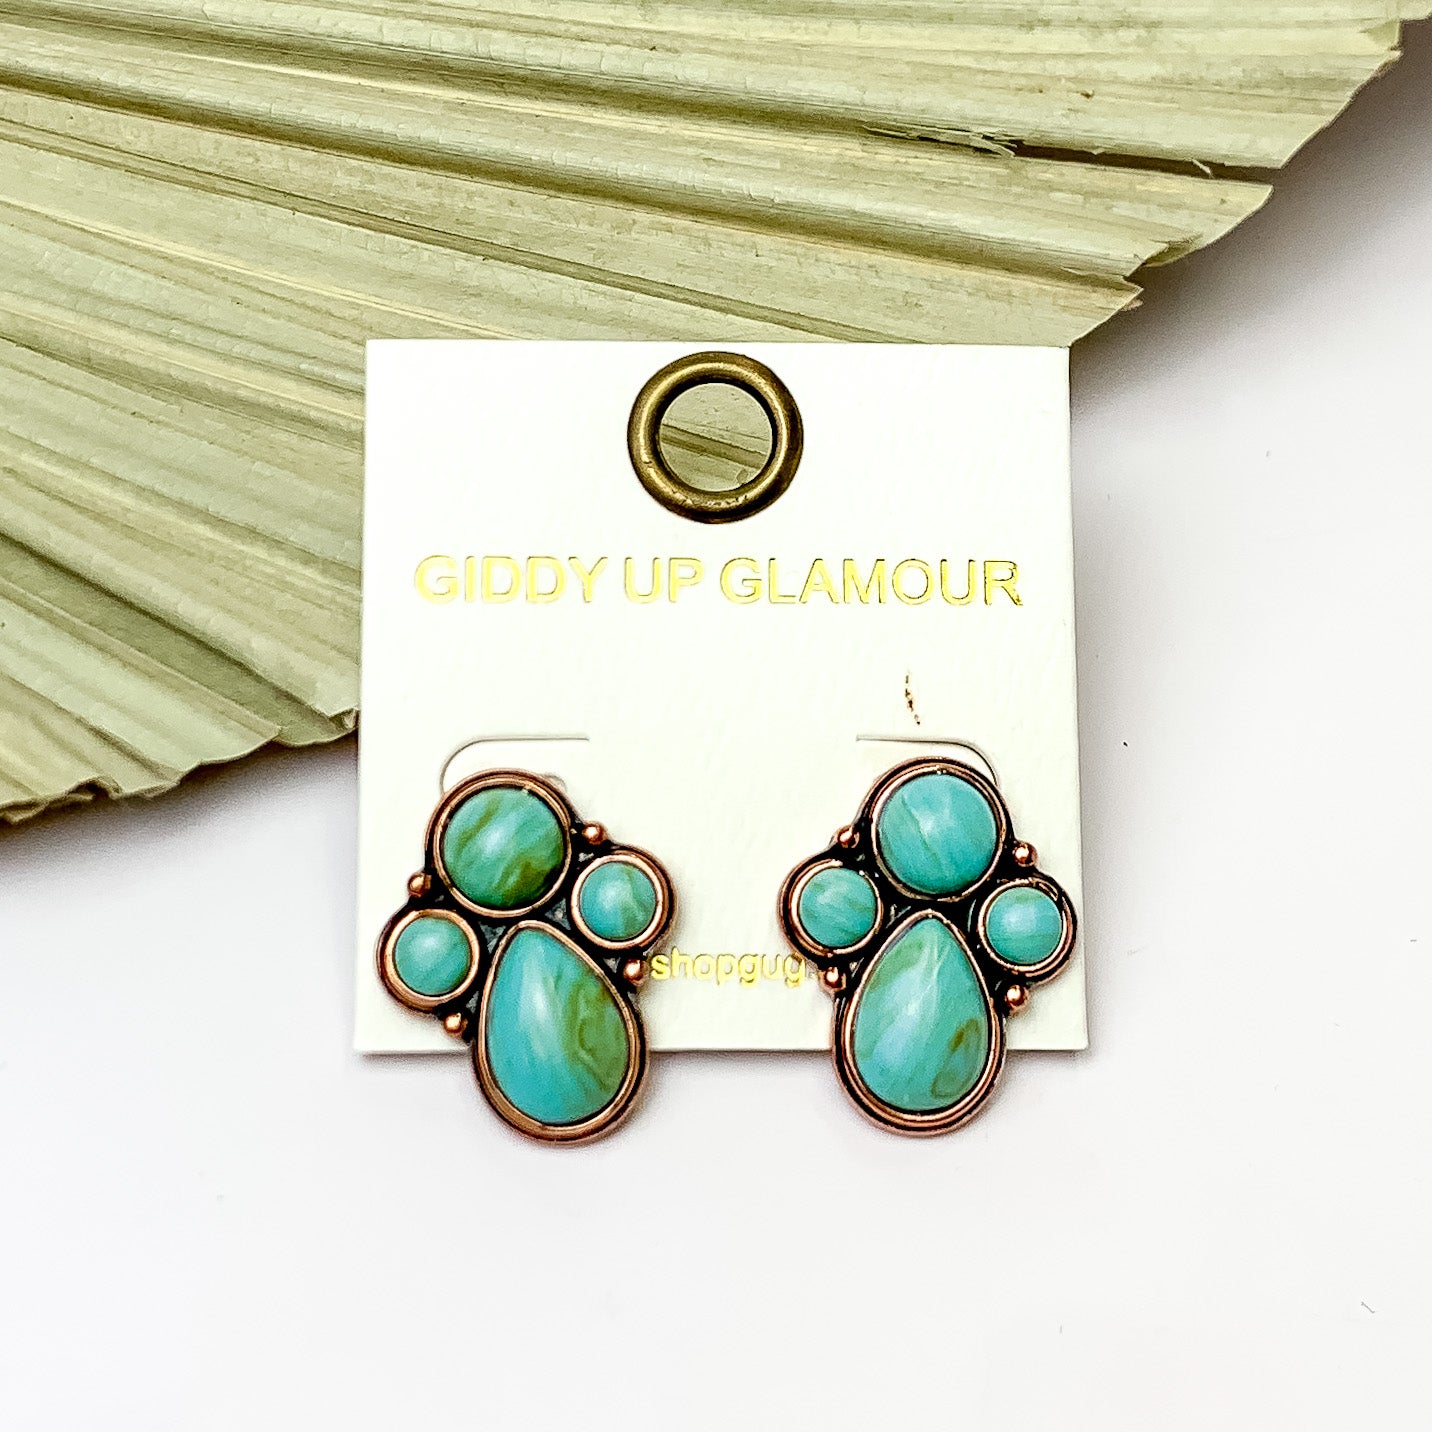 Copper Tone Cluster Stone Earrings in Turquoise Green. Pictured on a white background with a fan leaf behind the earrings.